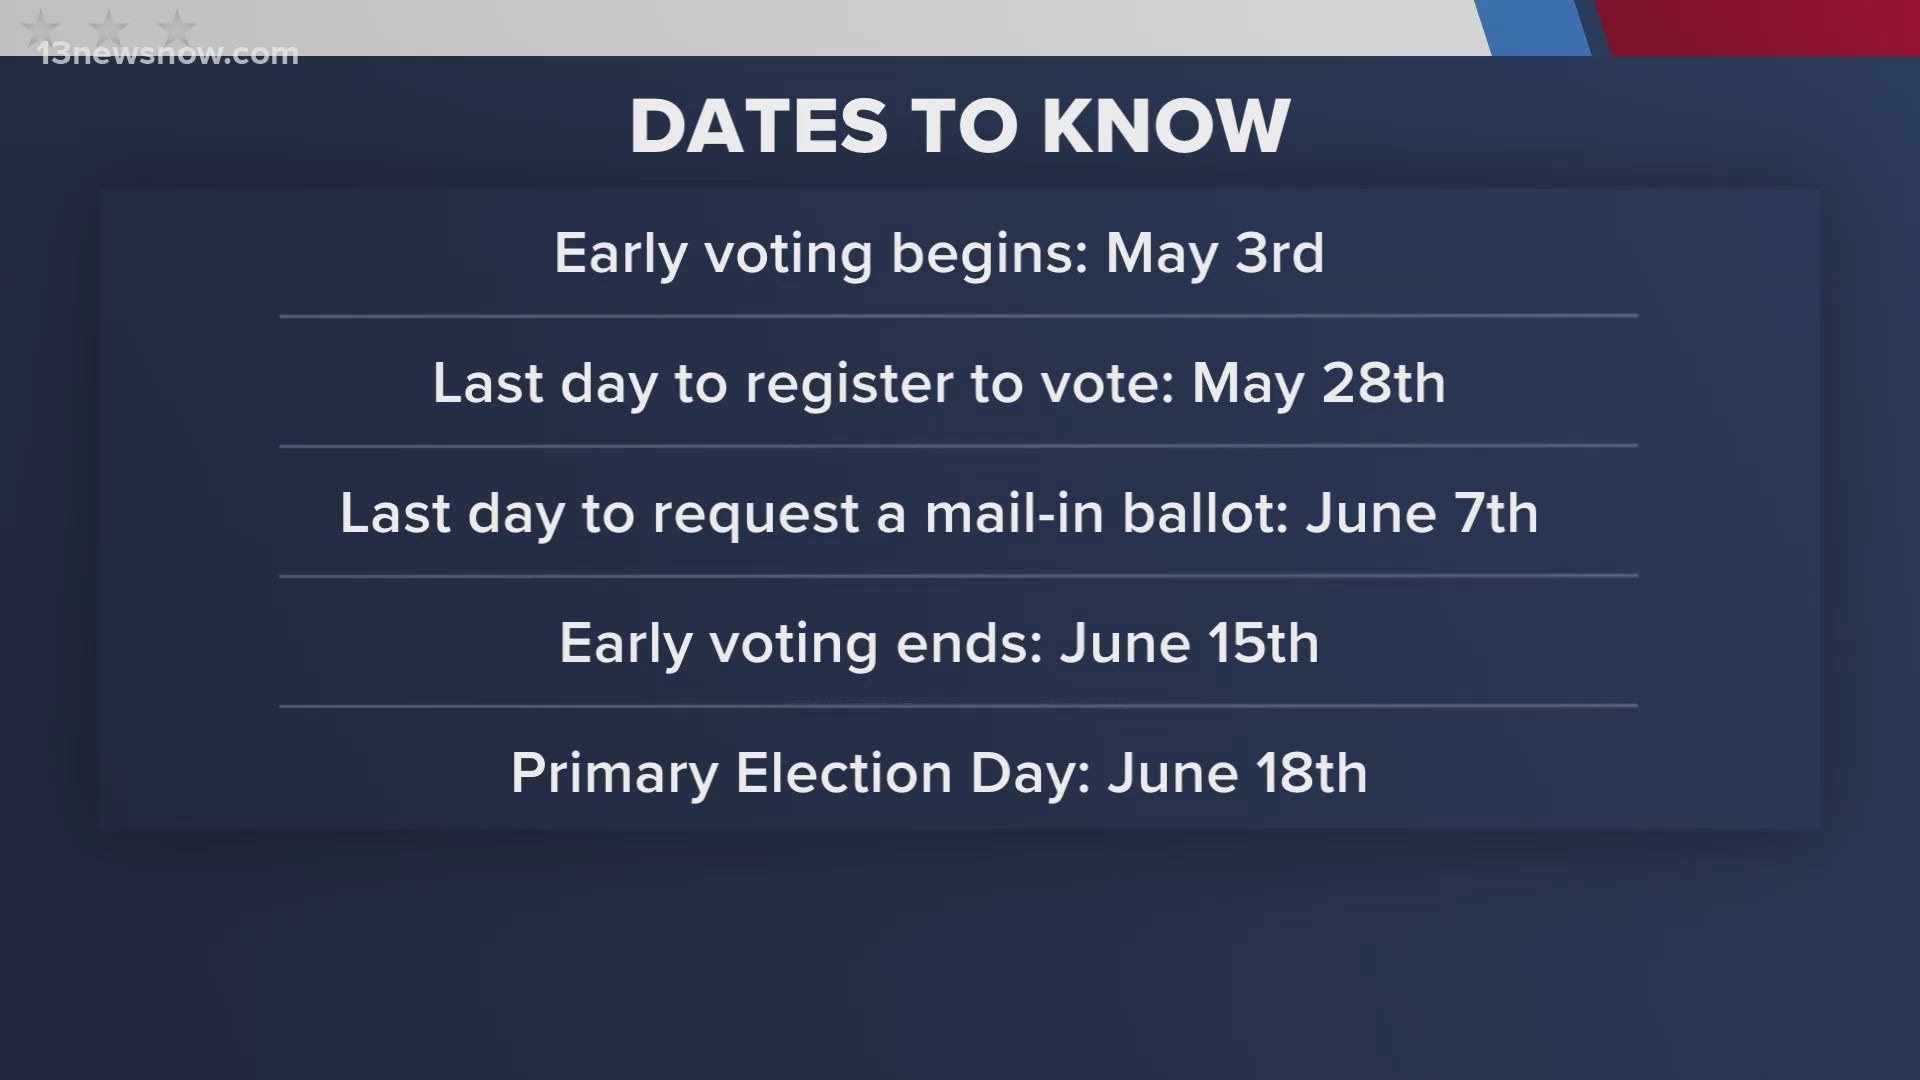 Tomorrow is the first day of early voting in Virginia for the June primary elections.